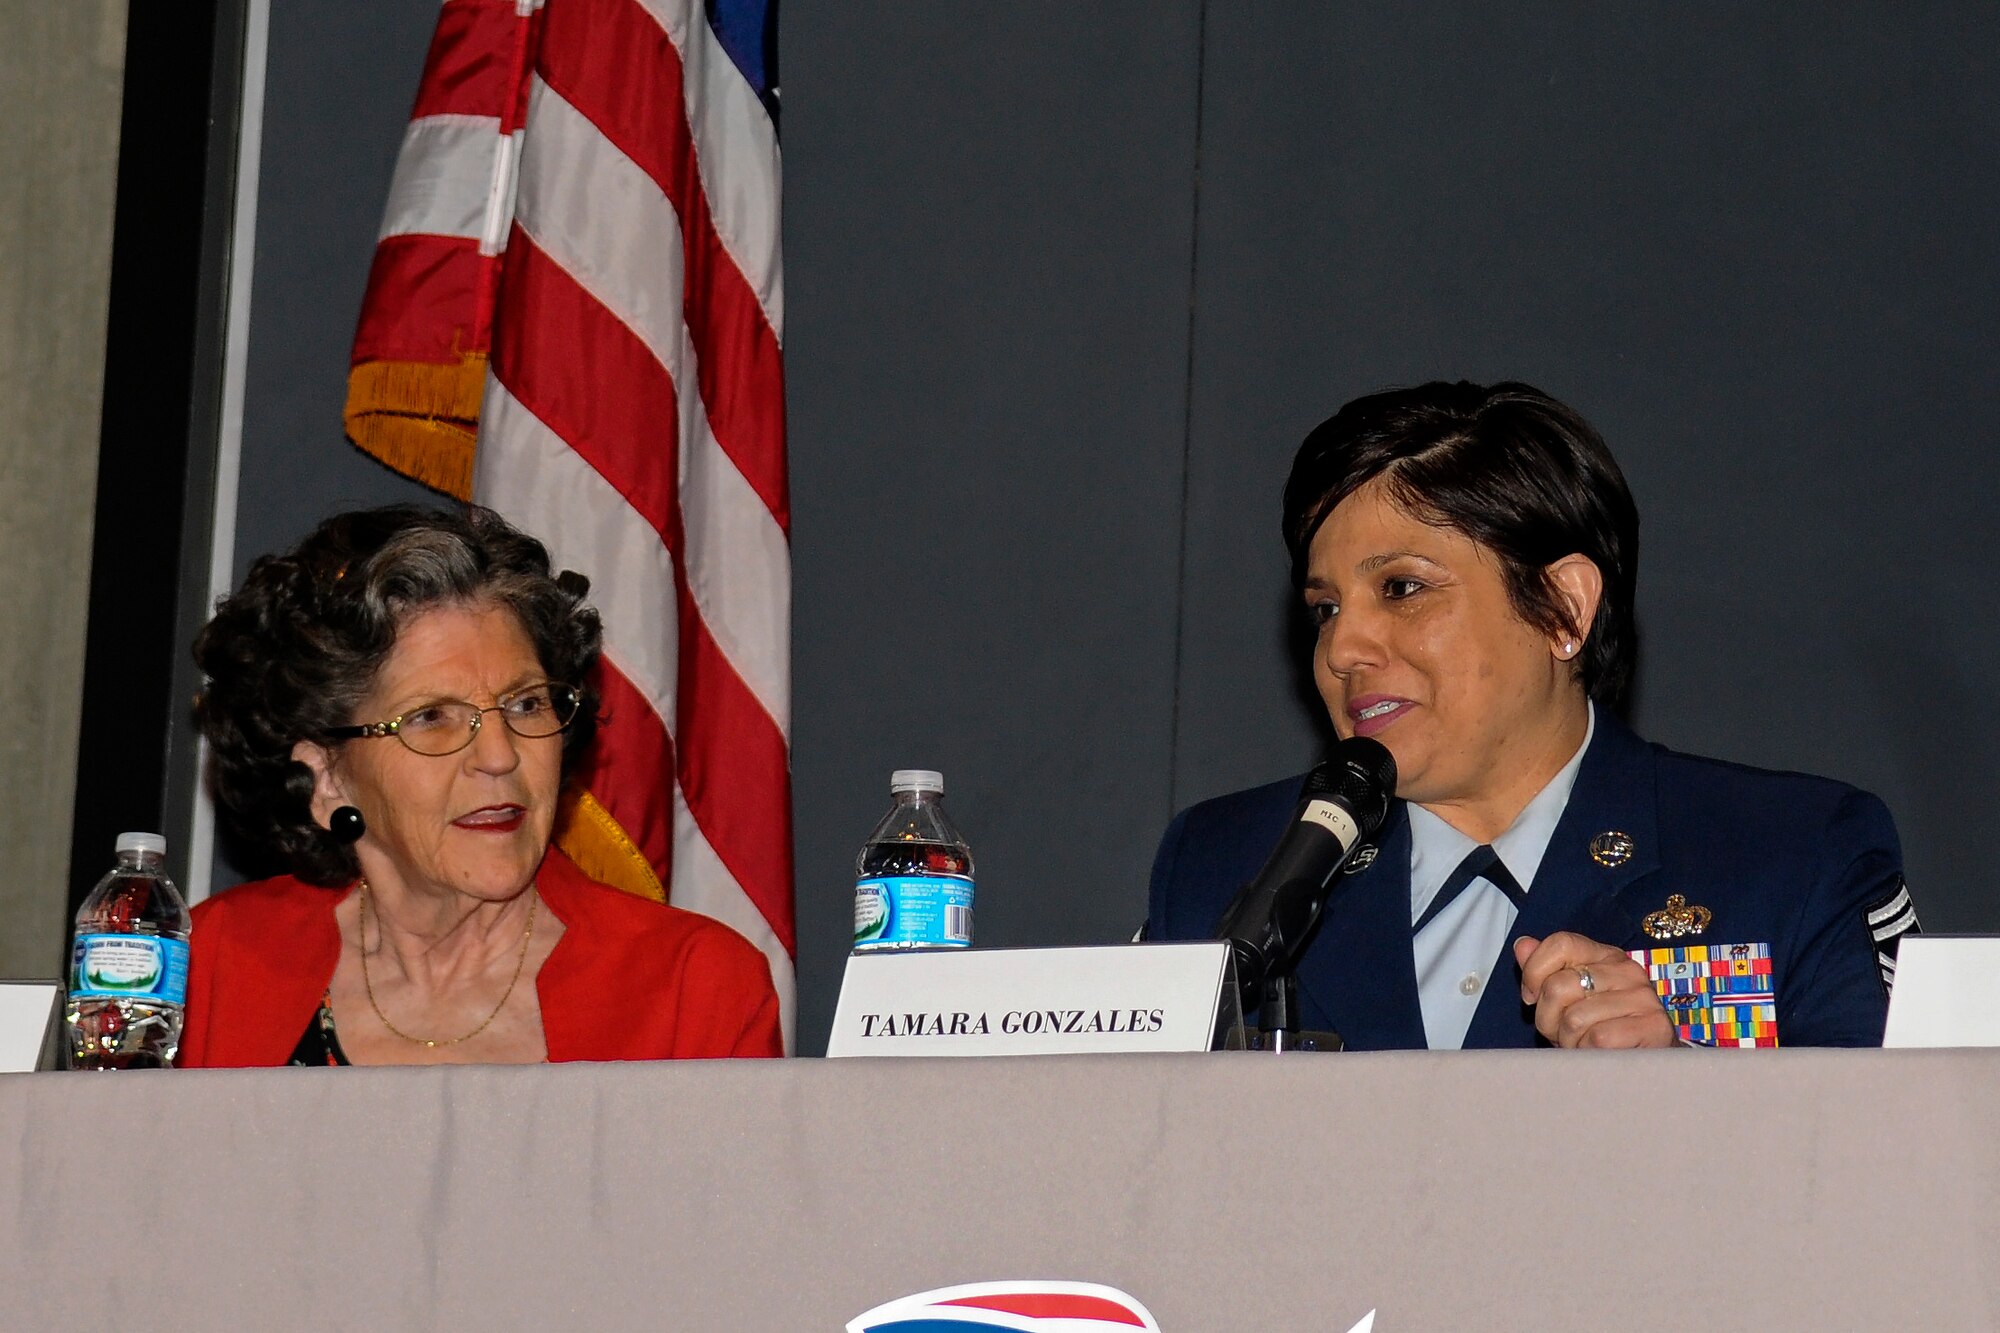 U.S. Air Force Senior Master Sgt. Tamara Gonzales, a First Sergeant with the 121st Air Refueling Wing, Ohio National Guard, participated in a Veterans panel discussion for women Mar. 10, 2017 at the Ohio History Center in Columbus, Ohio. The discussion was sponsored by the Ohio Department of Veterans Services in honor of Women's History Month. (U.S. Air National Guard photo by Senior Airman Wendy Kuhn)